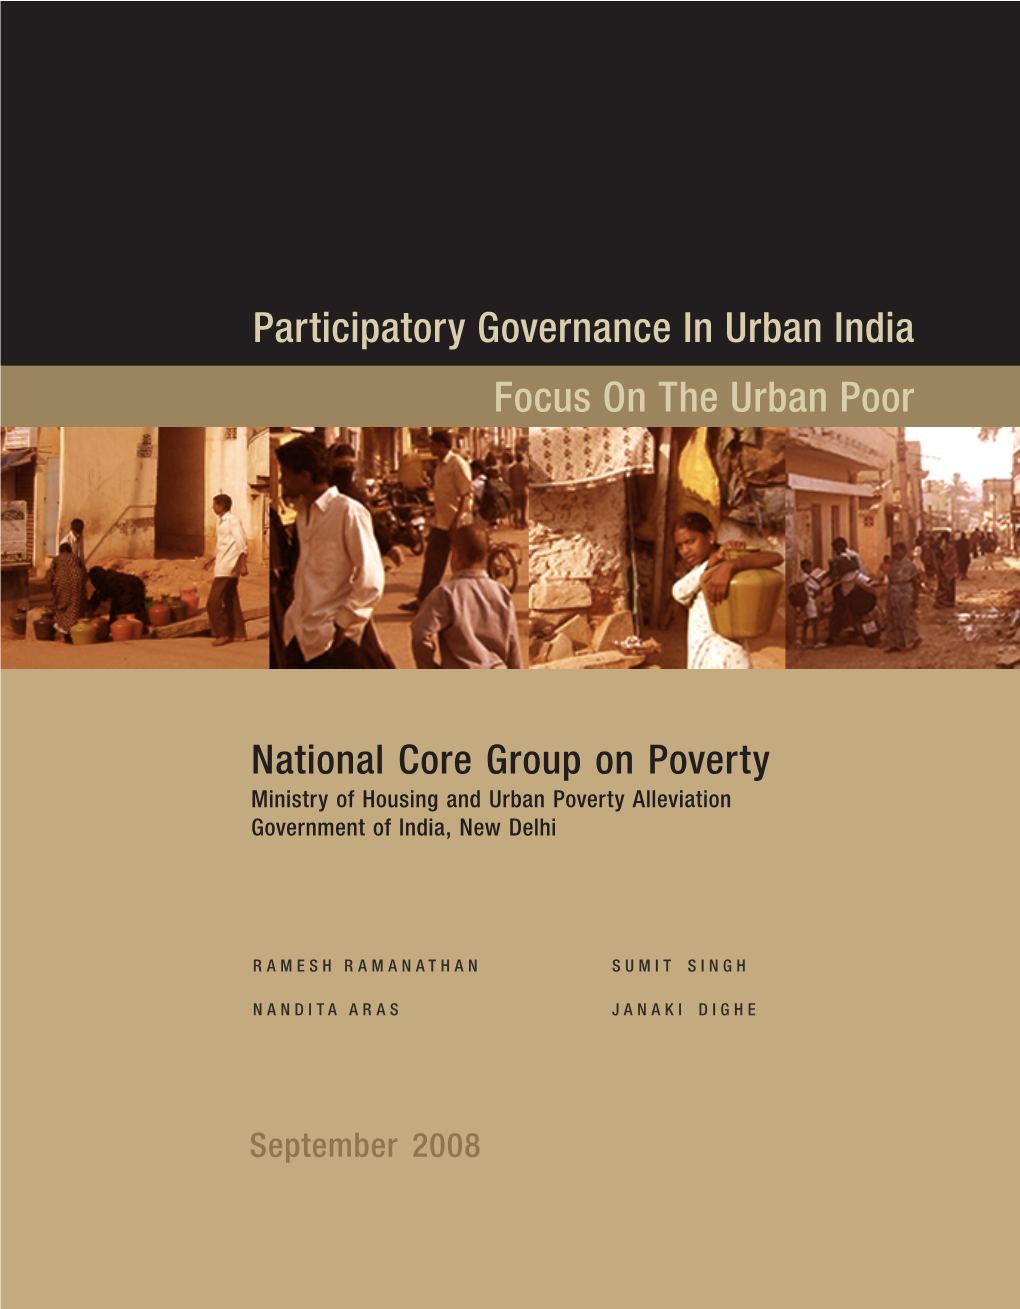 Participatory Governance in Urban India Focus on the Urban Poor